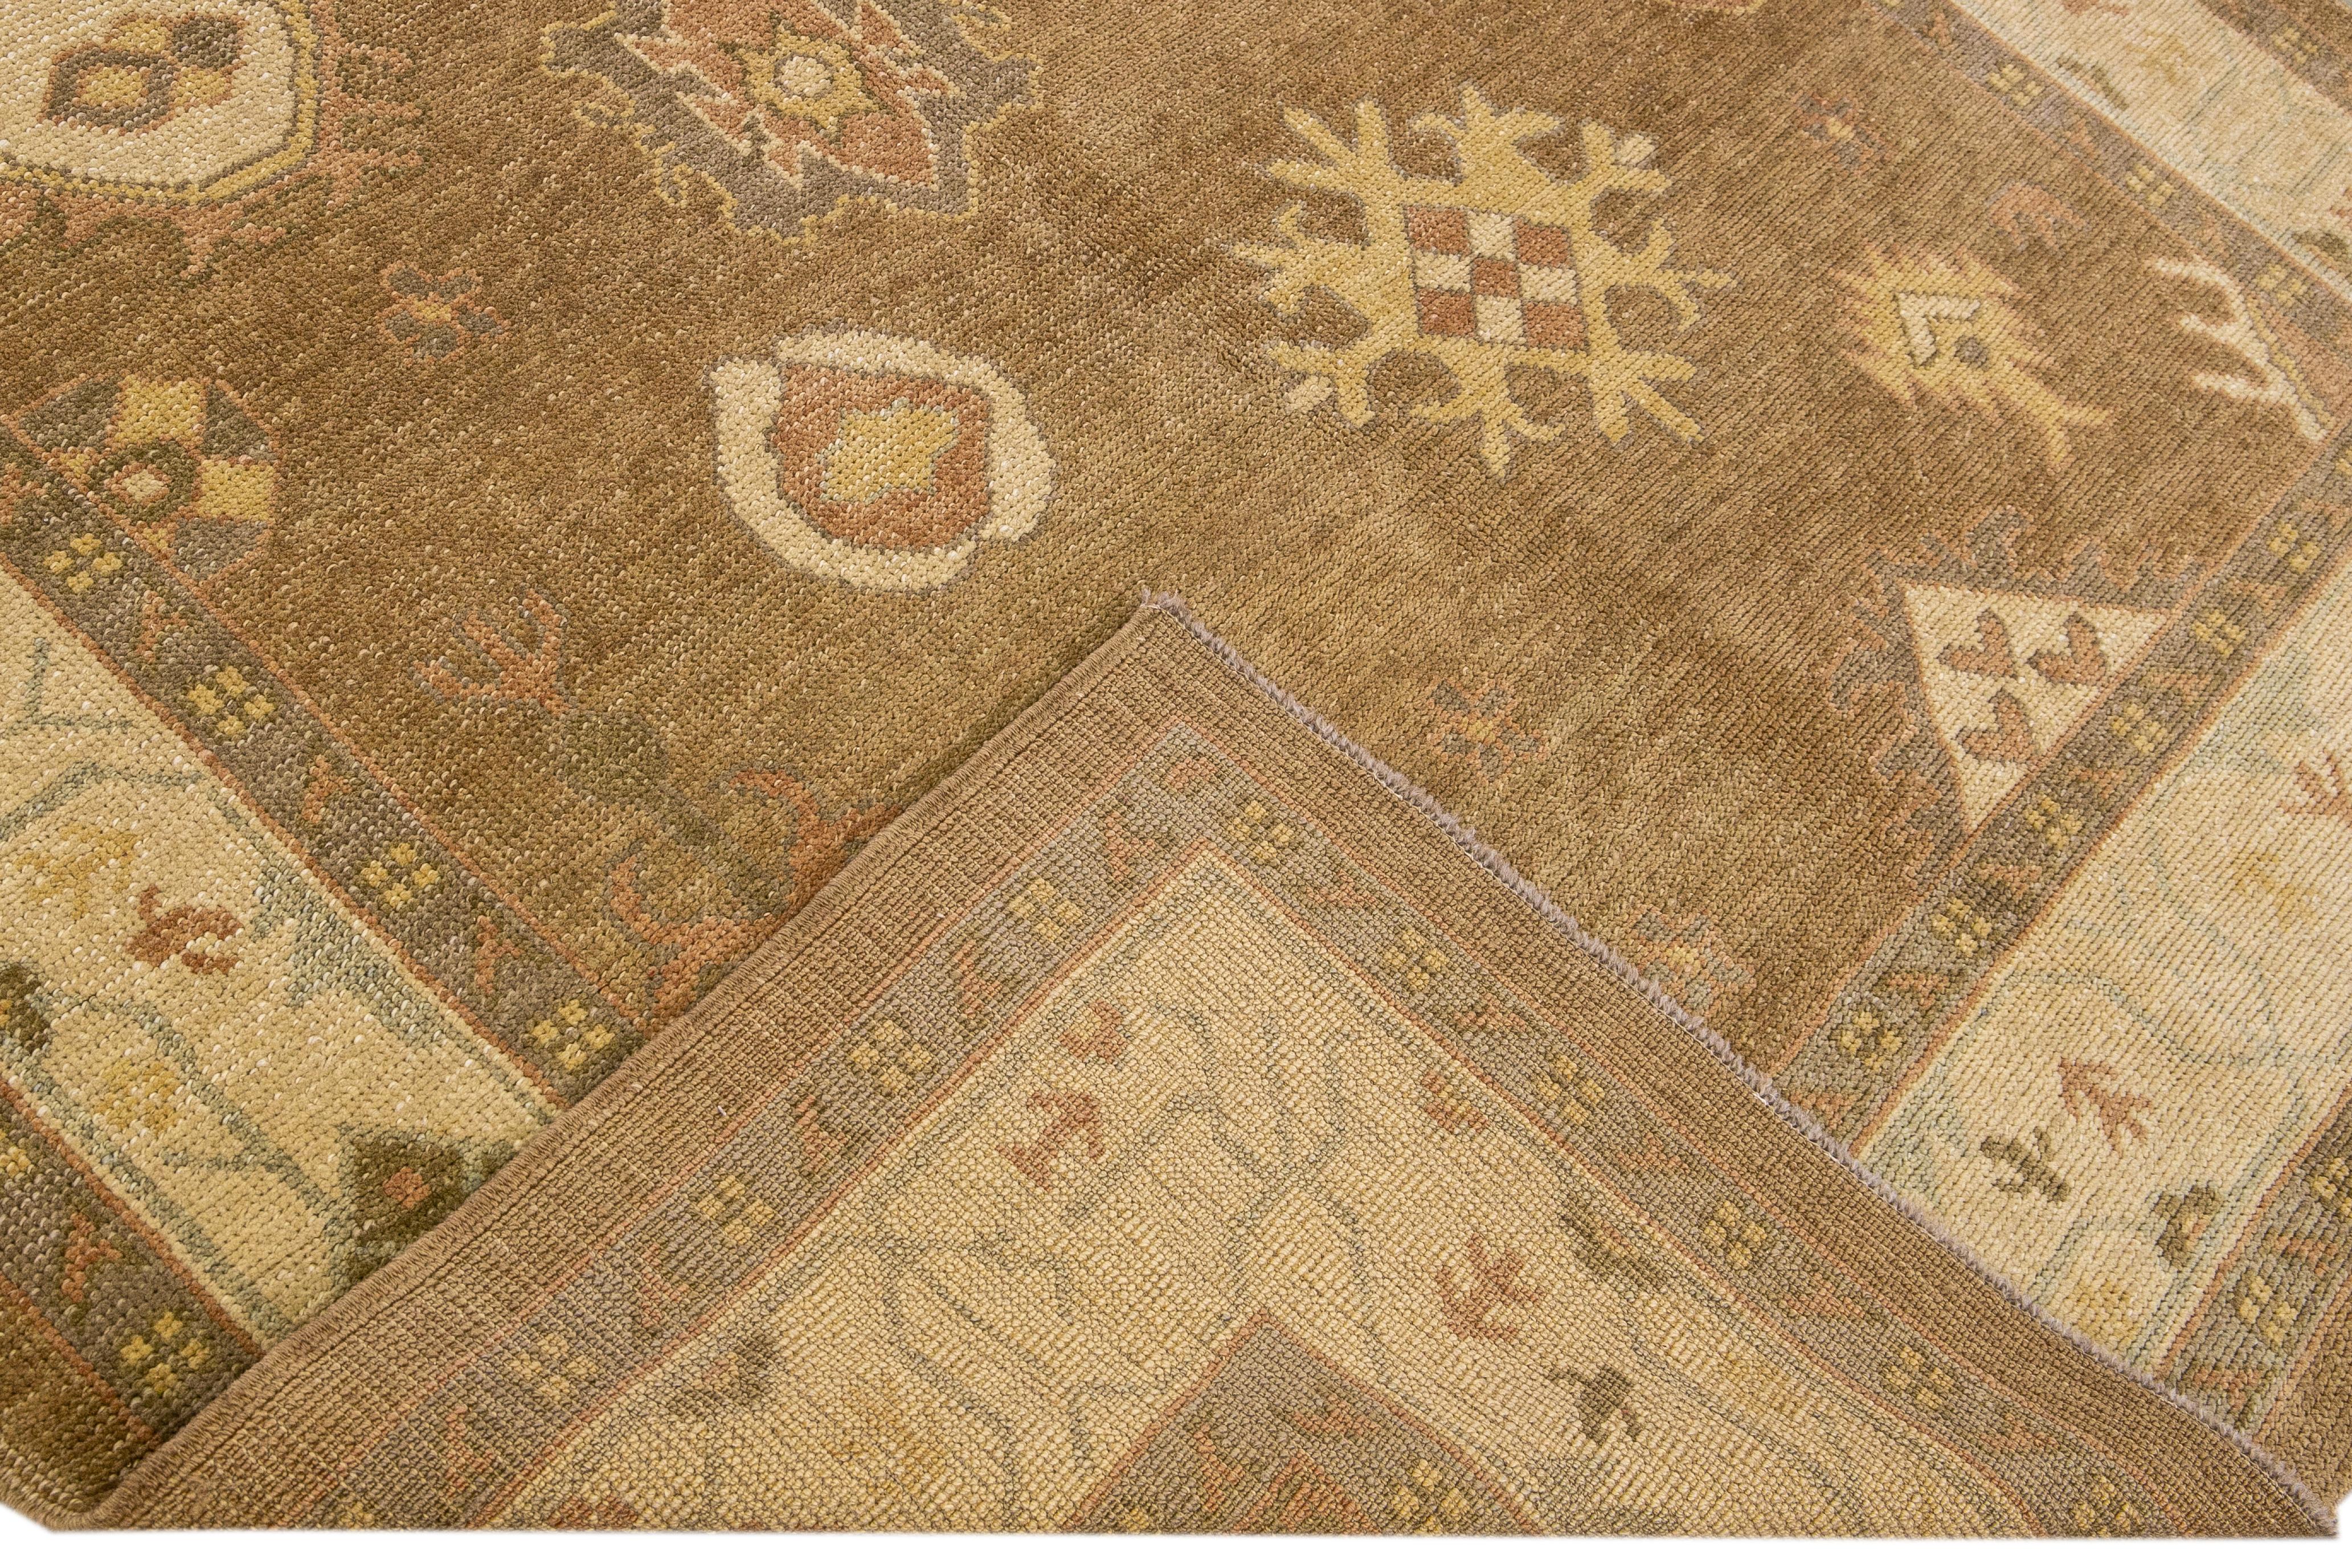 Beautiful Turkish Oushak hand-knotted wool rug with the tan field. This Turkish rug has a beige frame and multicolor accents in a gorgeous layout floral motif.

This rug measures: 6'5